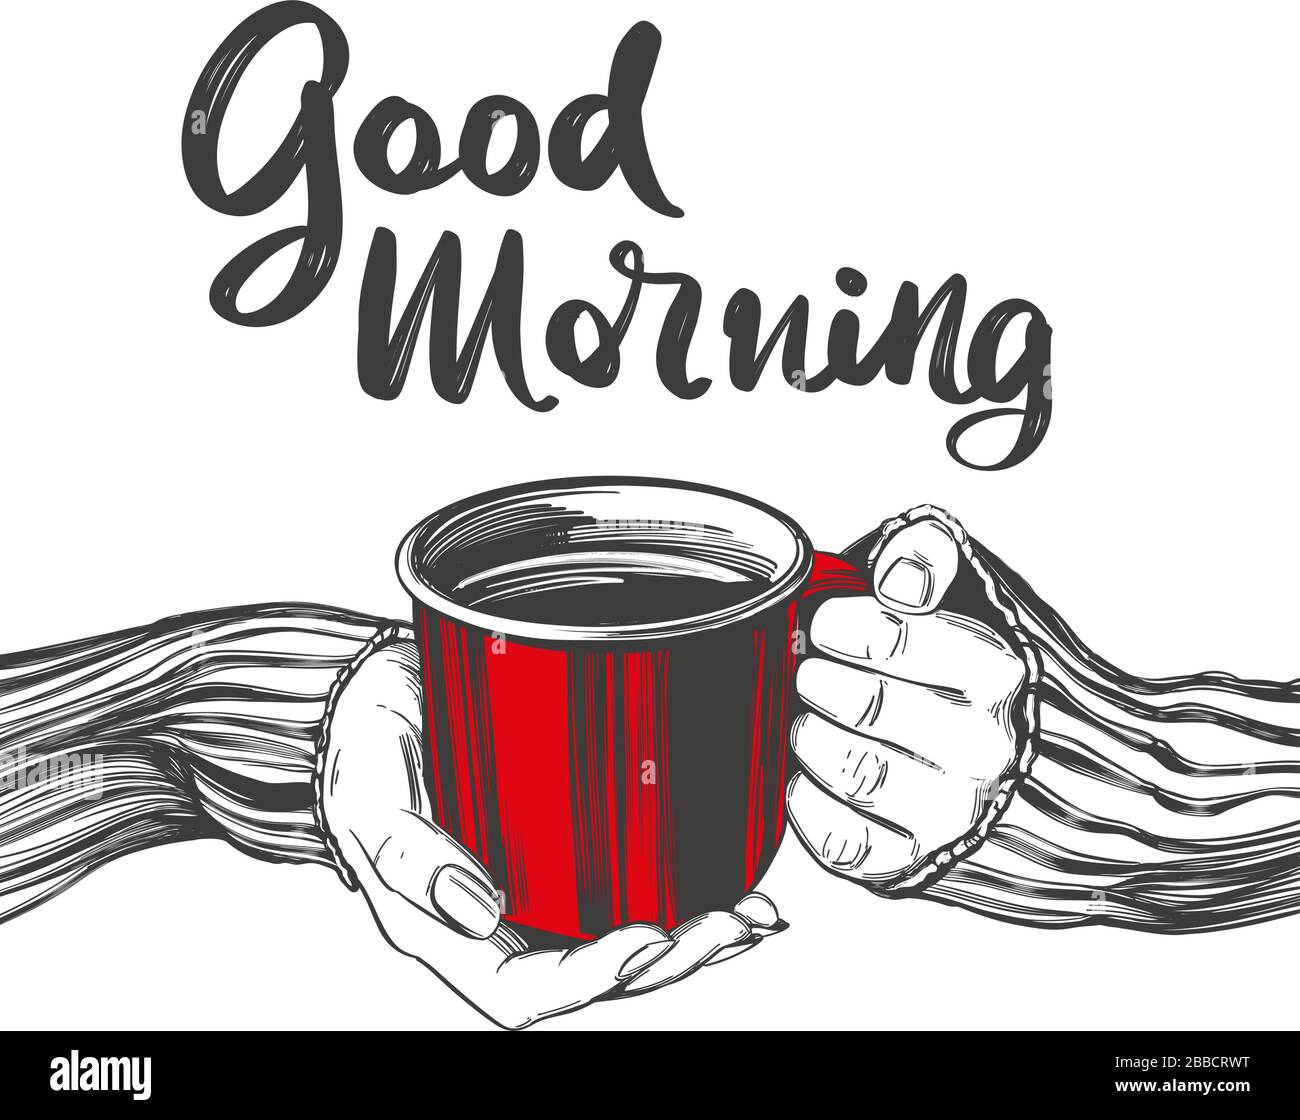 Morning Sketch Vector Images over 16000